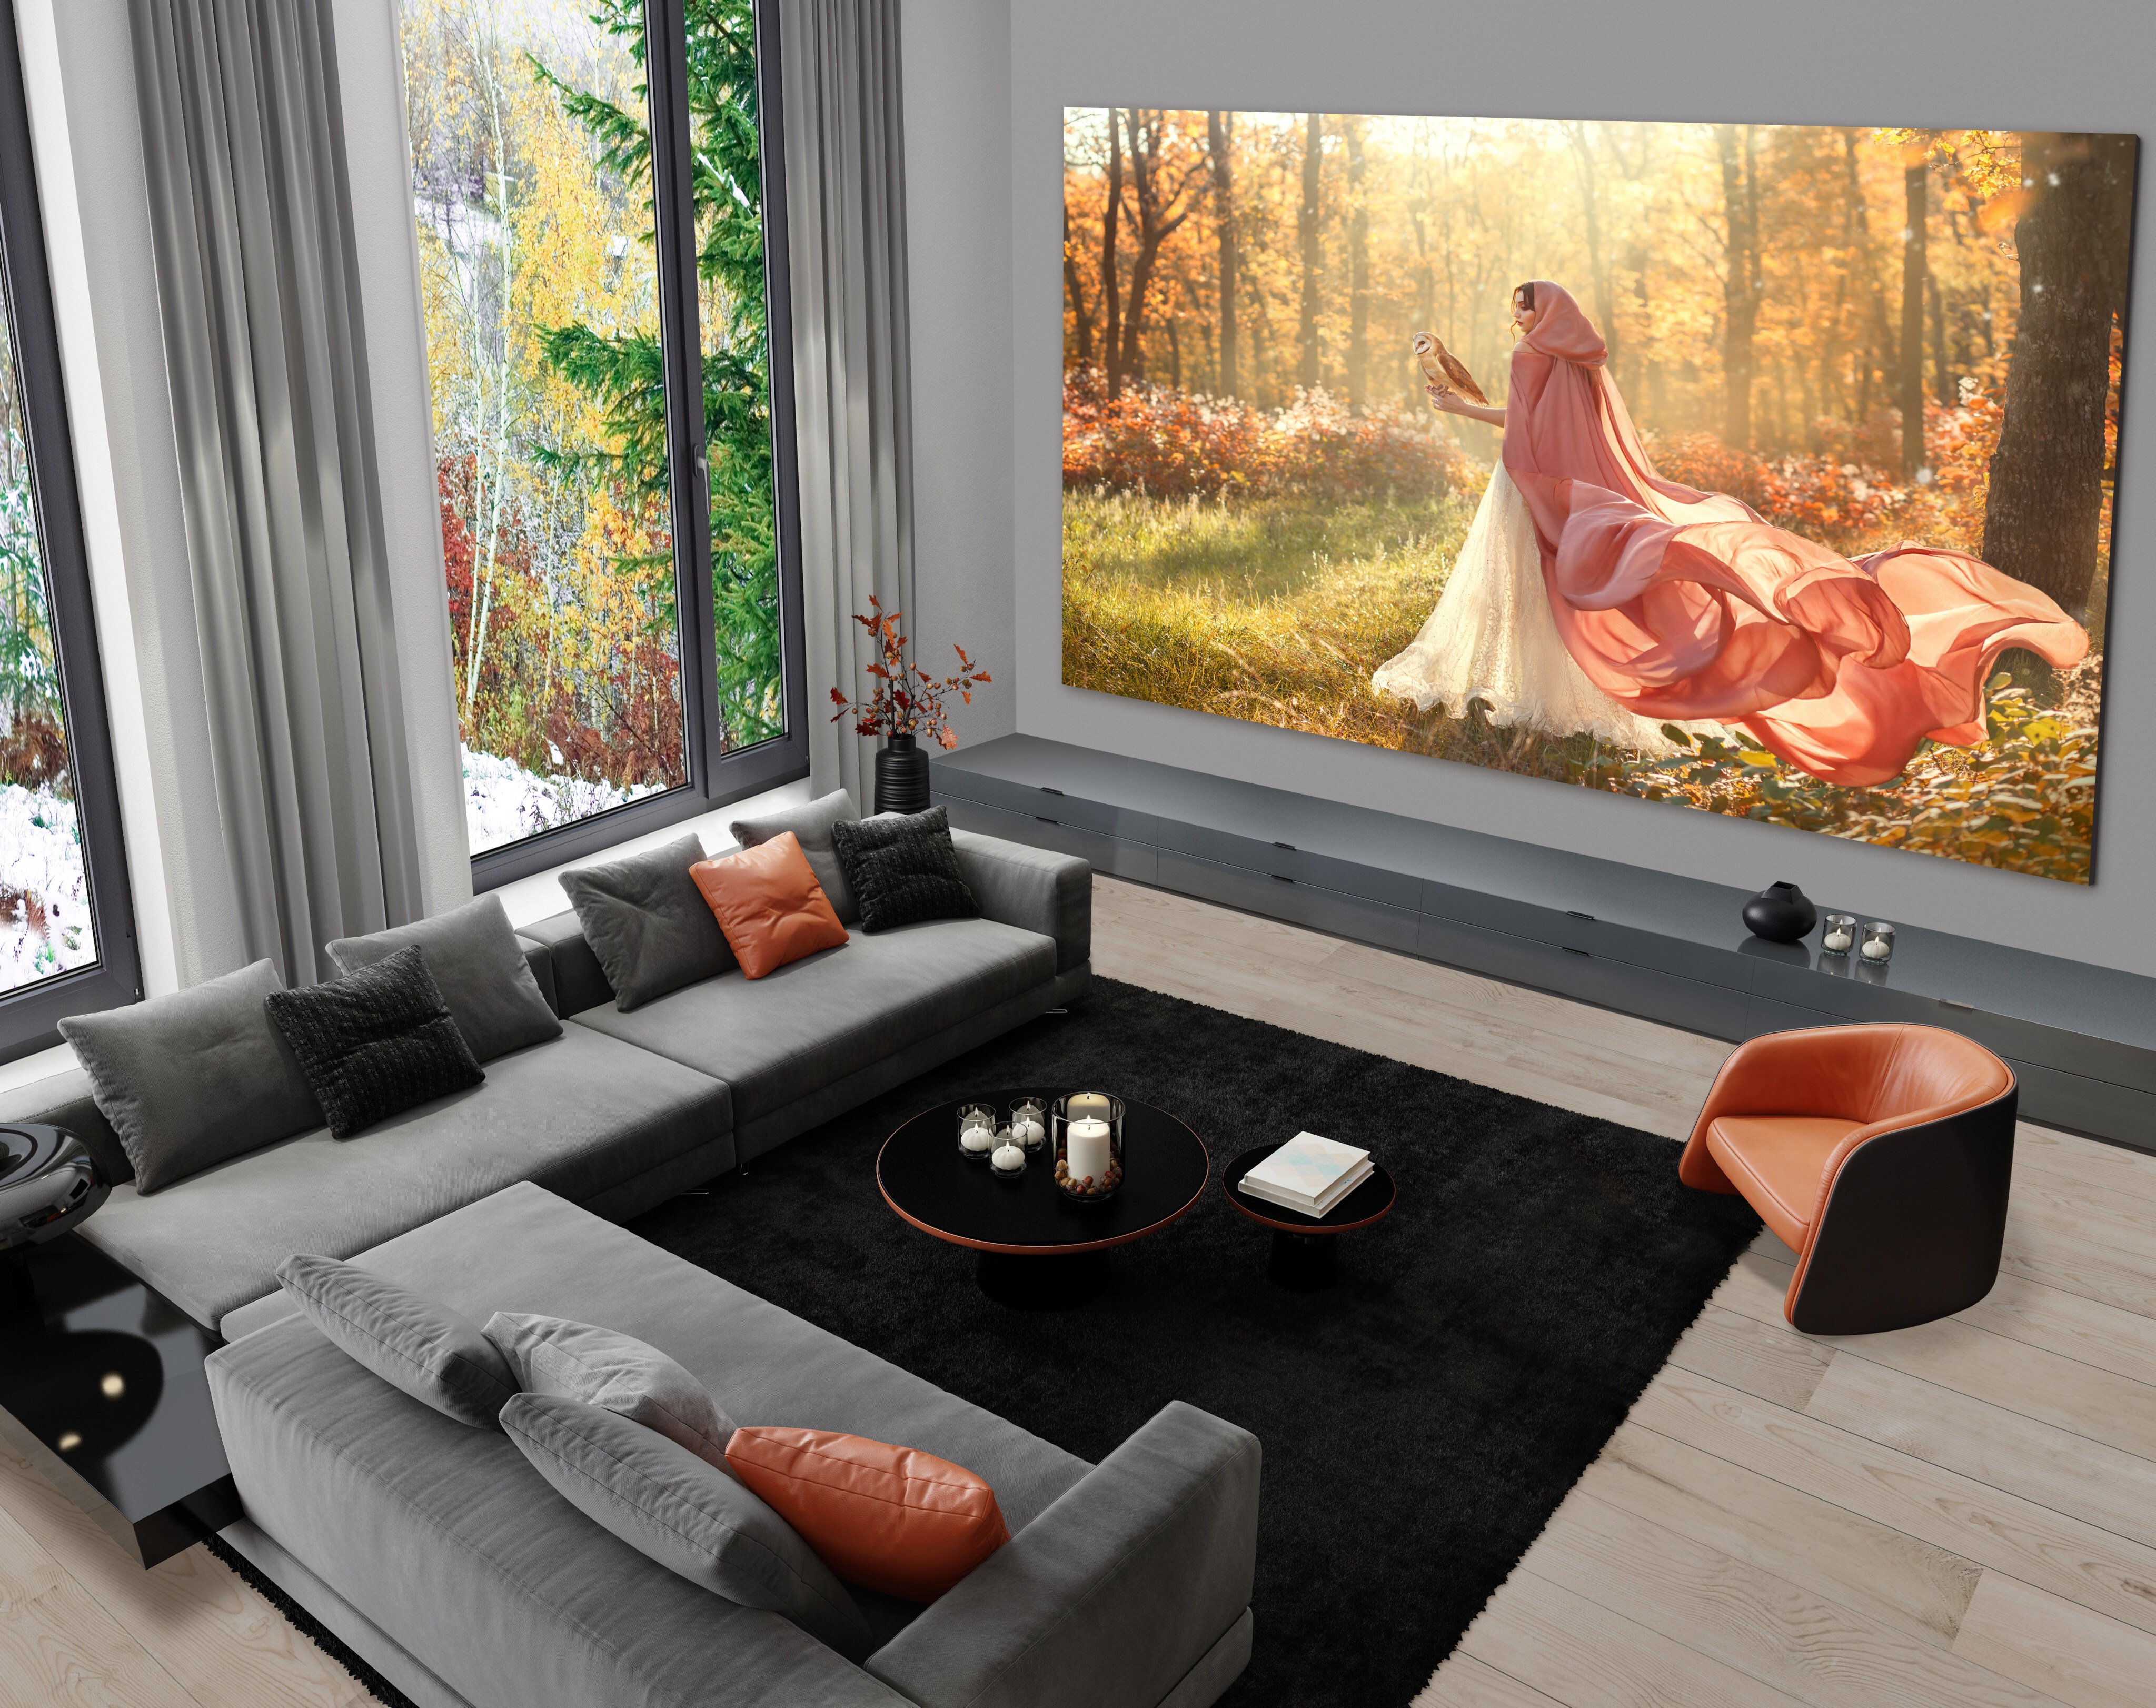 The massive LG DVLED Extreme Home Cinema Wall-sized Display is not for your average homeowner. Photo: Handout